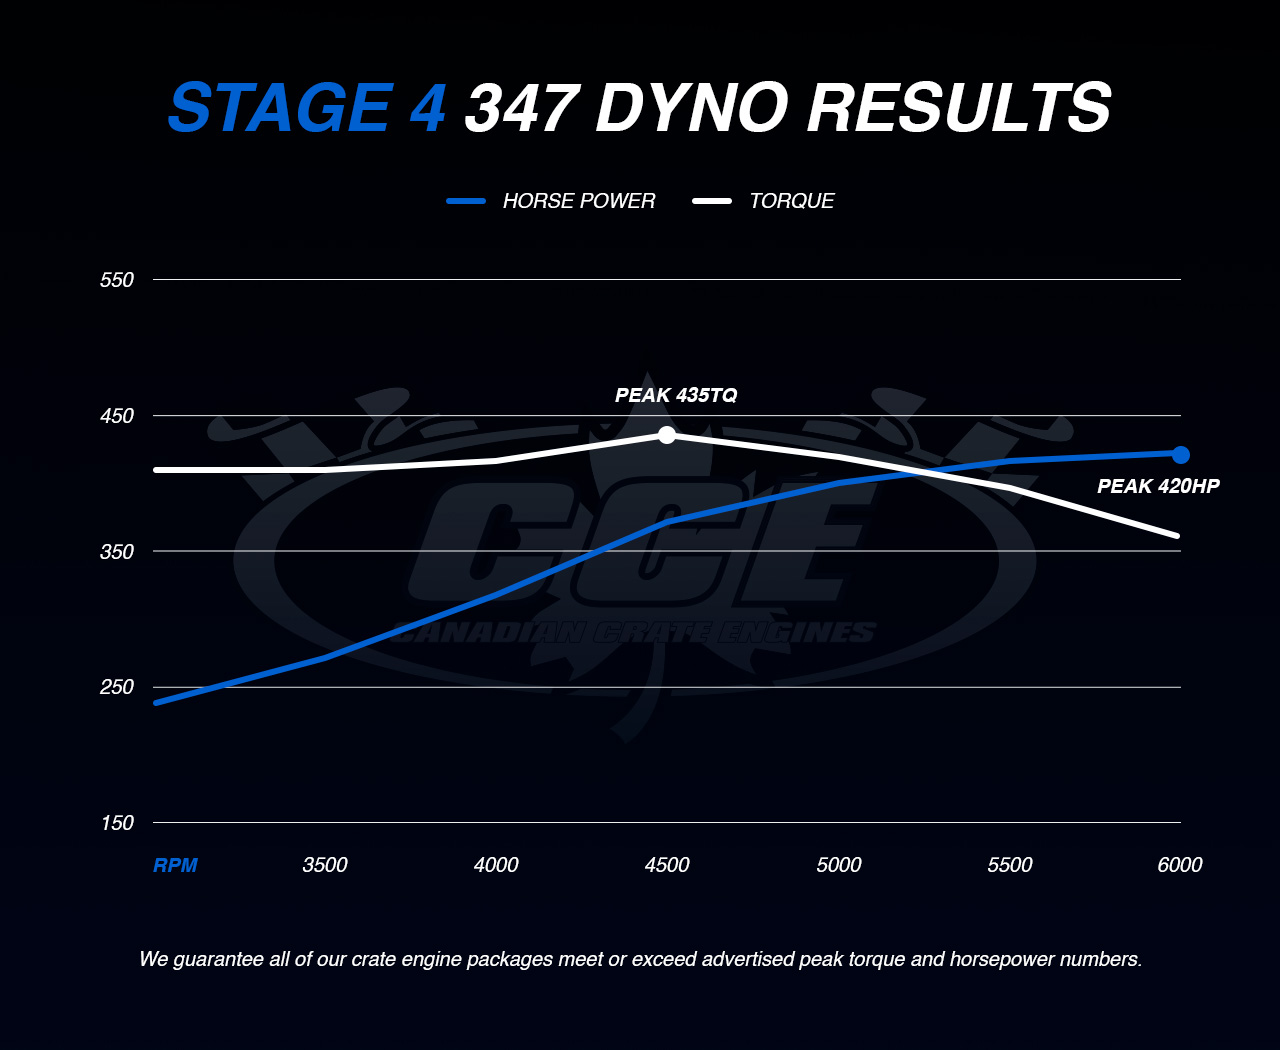 Dyno Graph Results for Ford Stage 4 showing peak torque of 435TQ and peak horsepower of 420HP